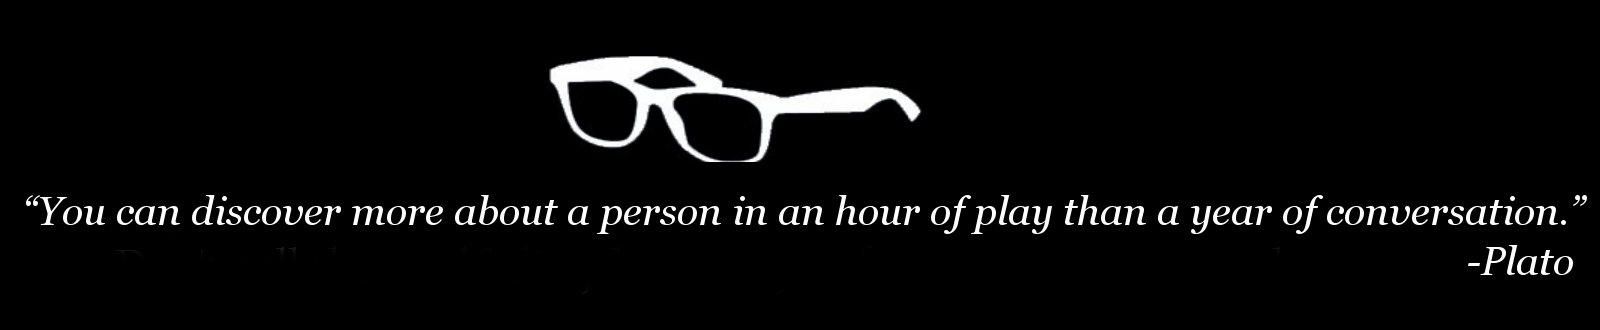 White glasses stand out in a black background and over a quote by Plato that says “You can discover more about a person in an hour of play than a year of conversation.”